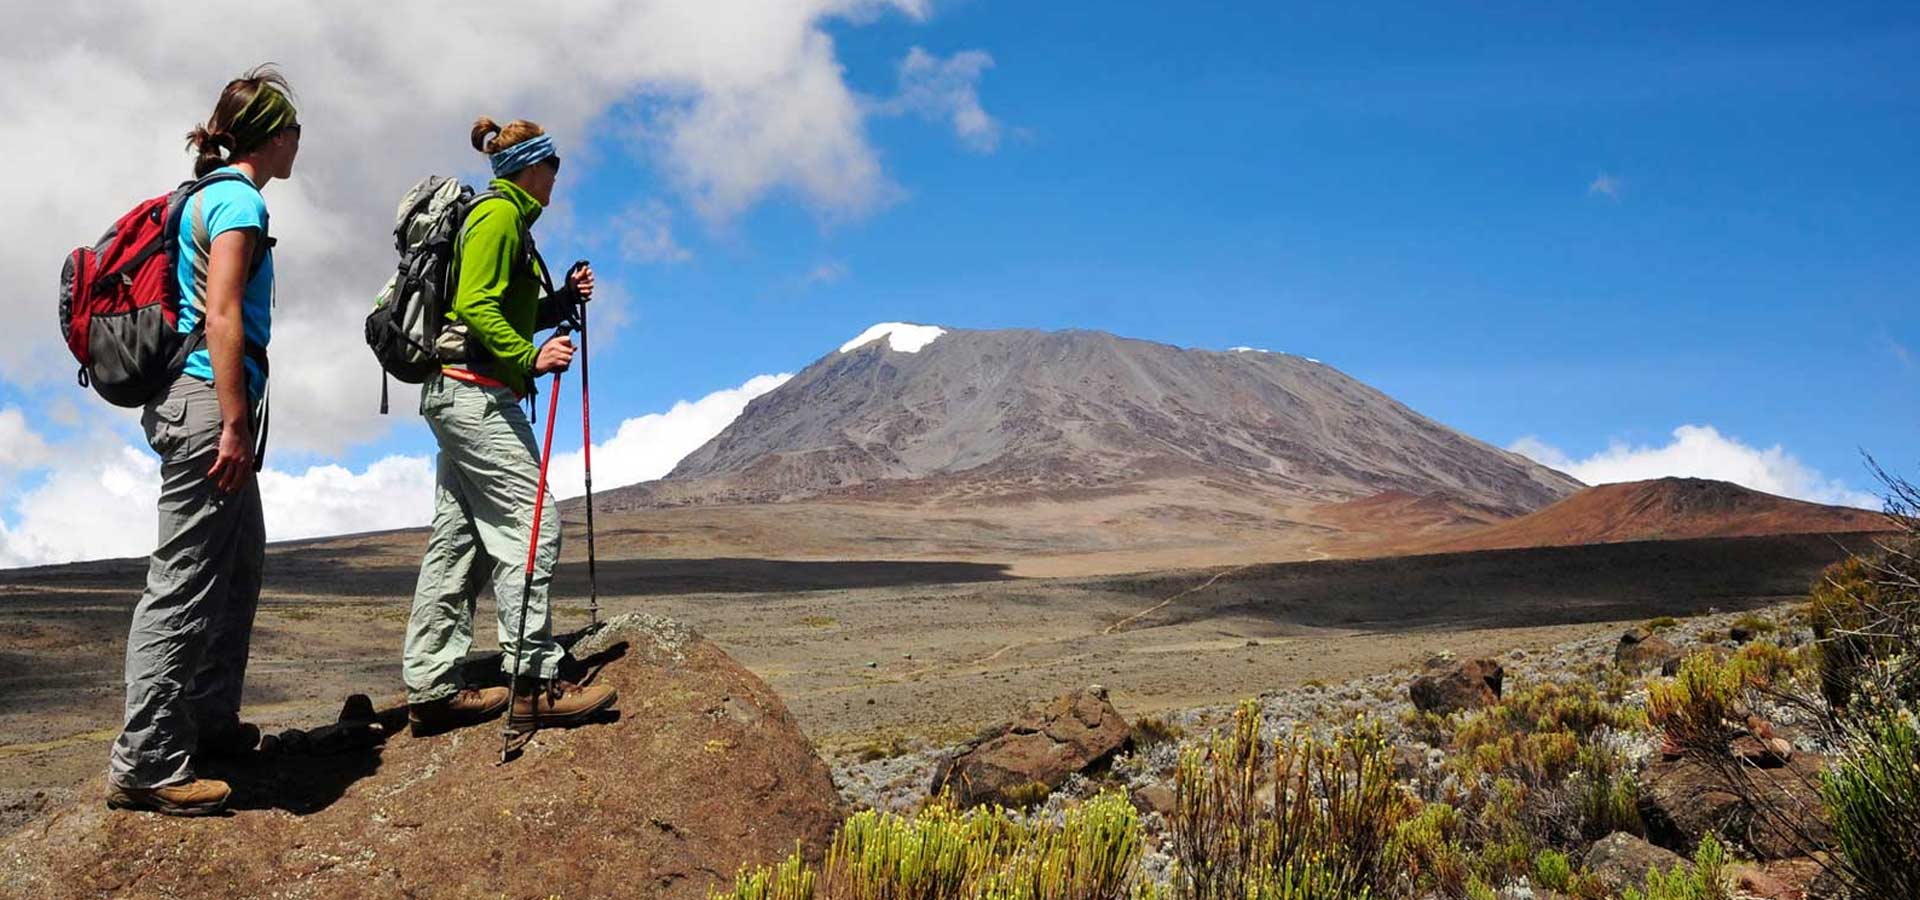 What Is The Best Time To Climb Kilimanjaro?